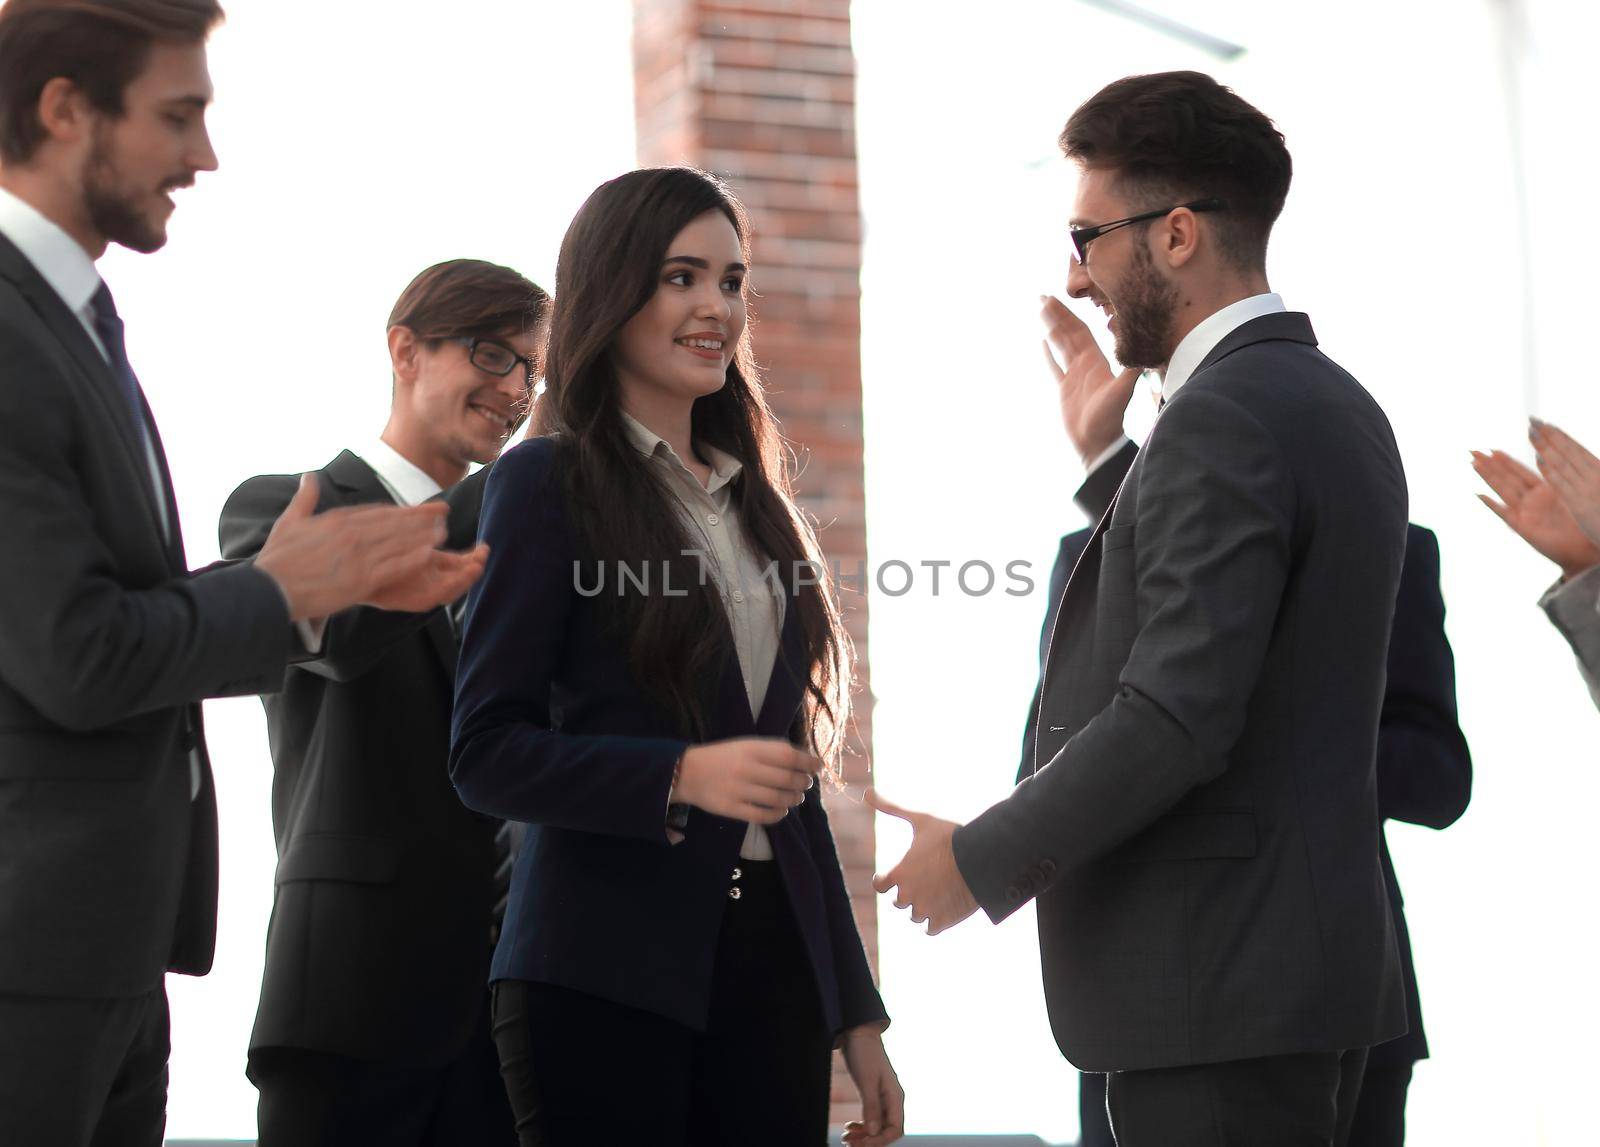 A team of employees congratulating each other.